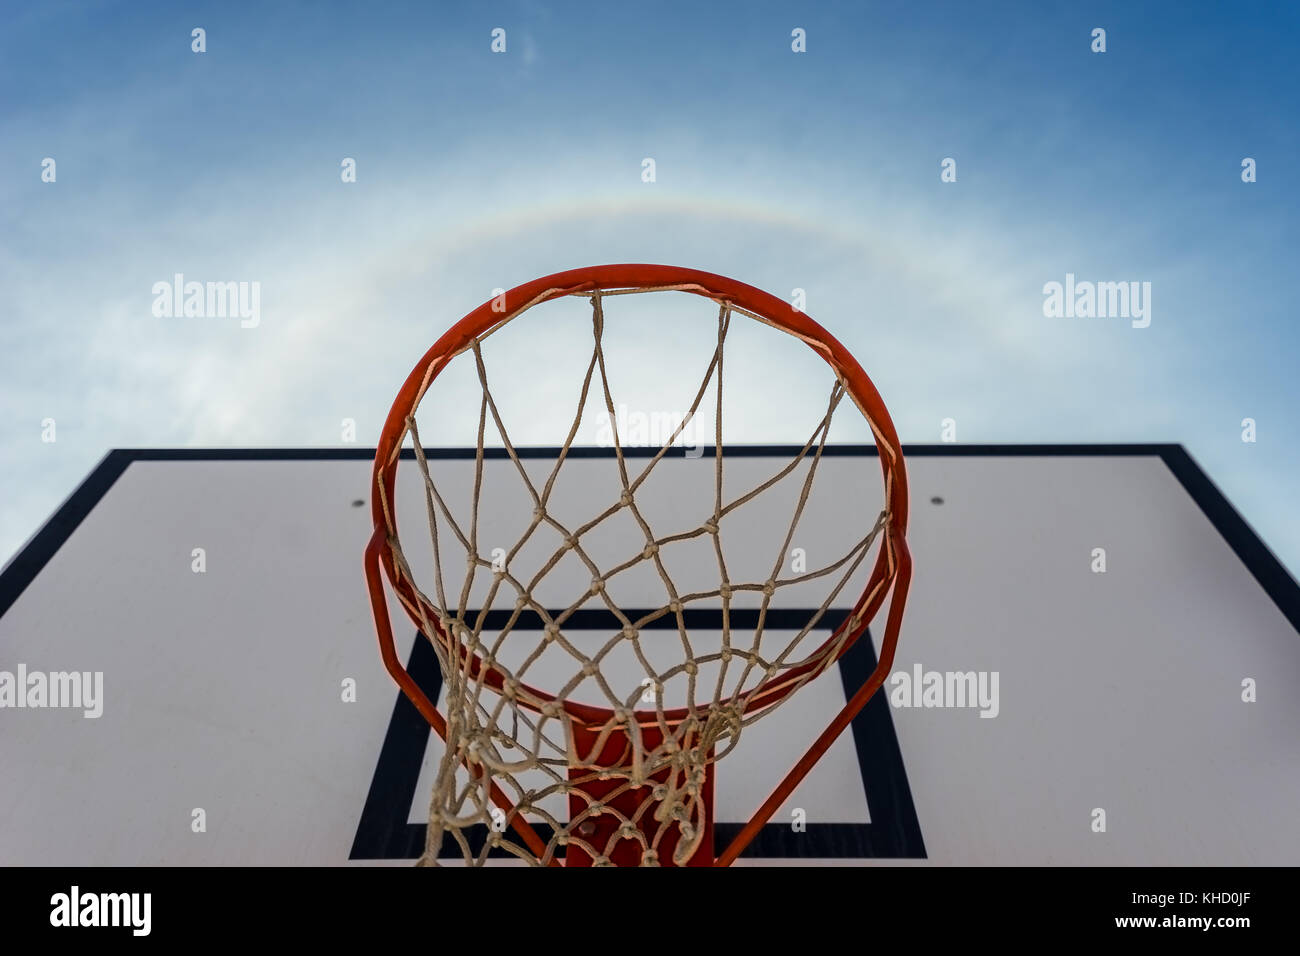 outdoor basketball hoop above view Stock Photo